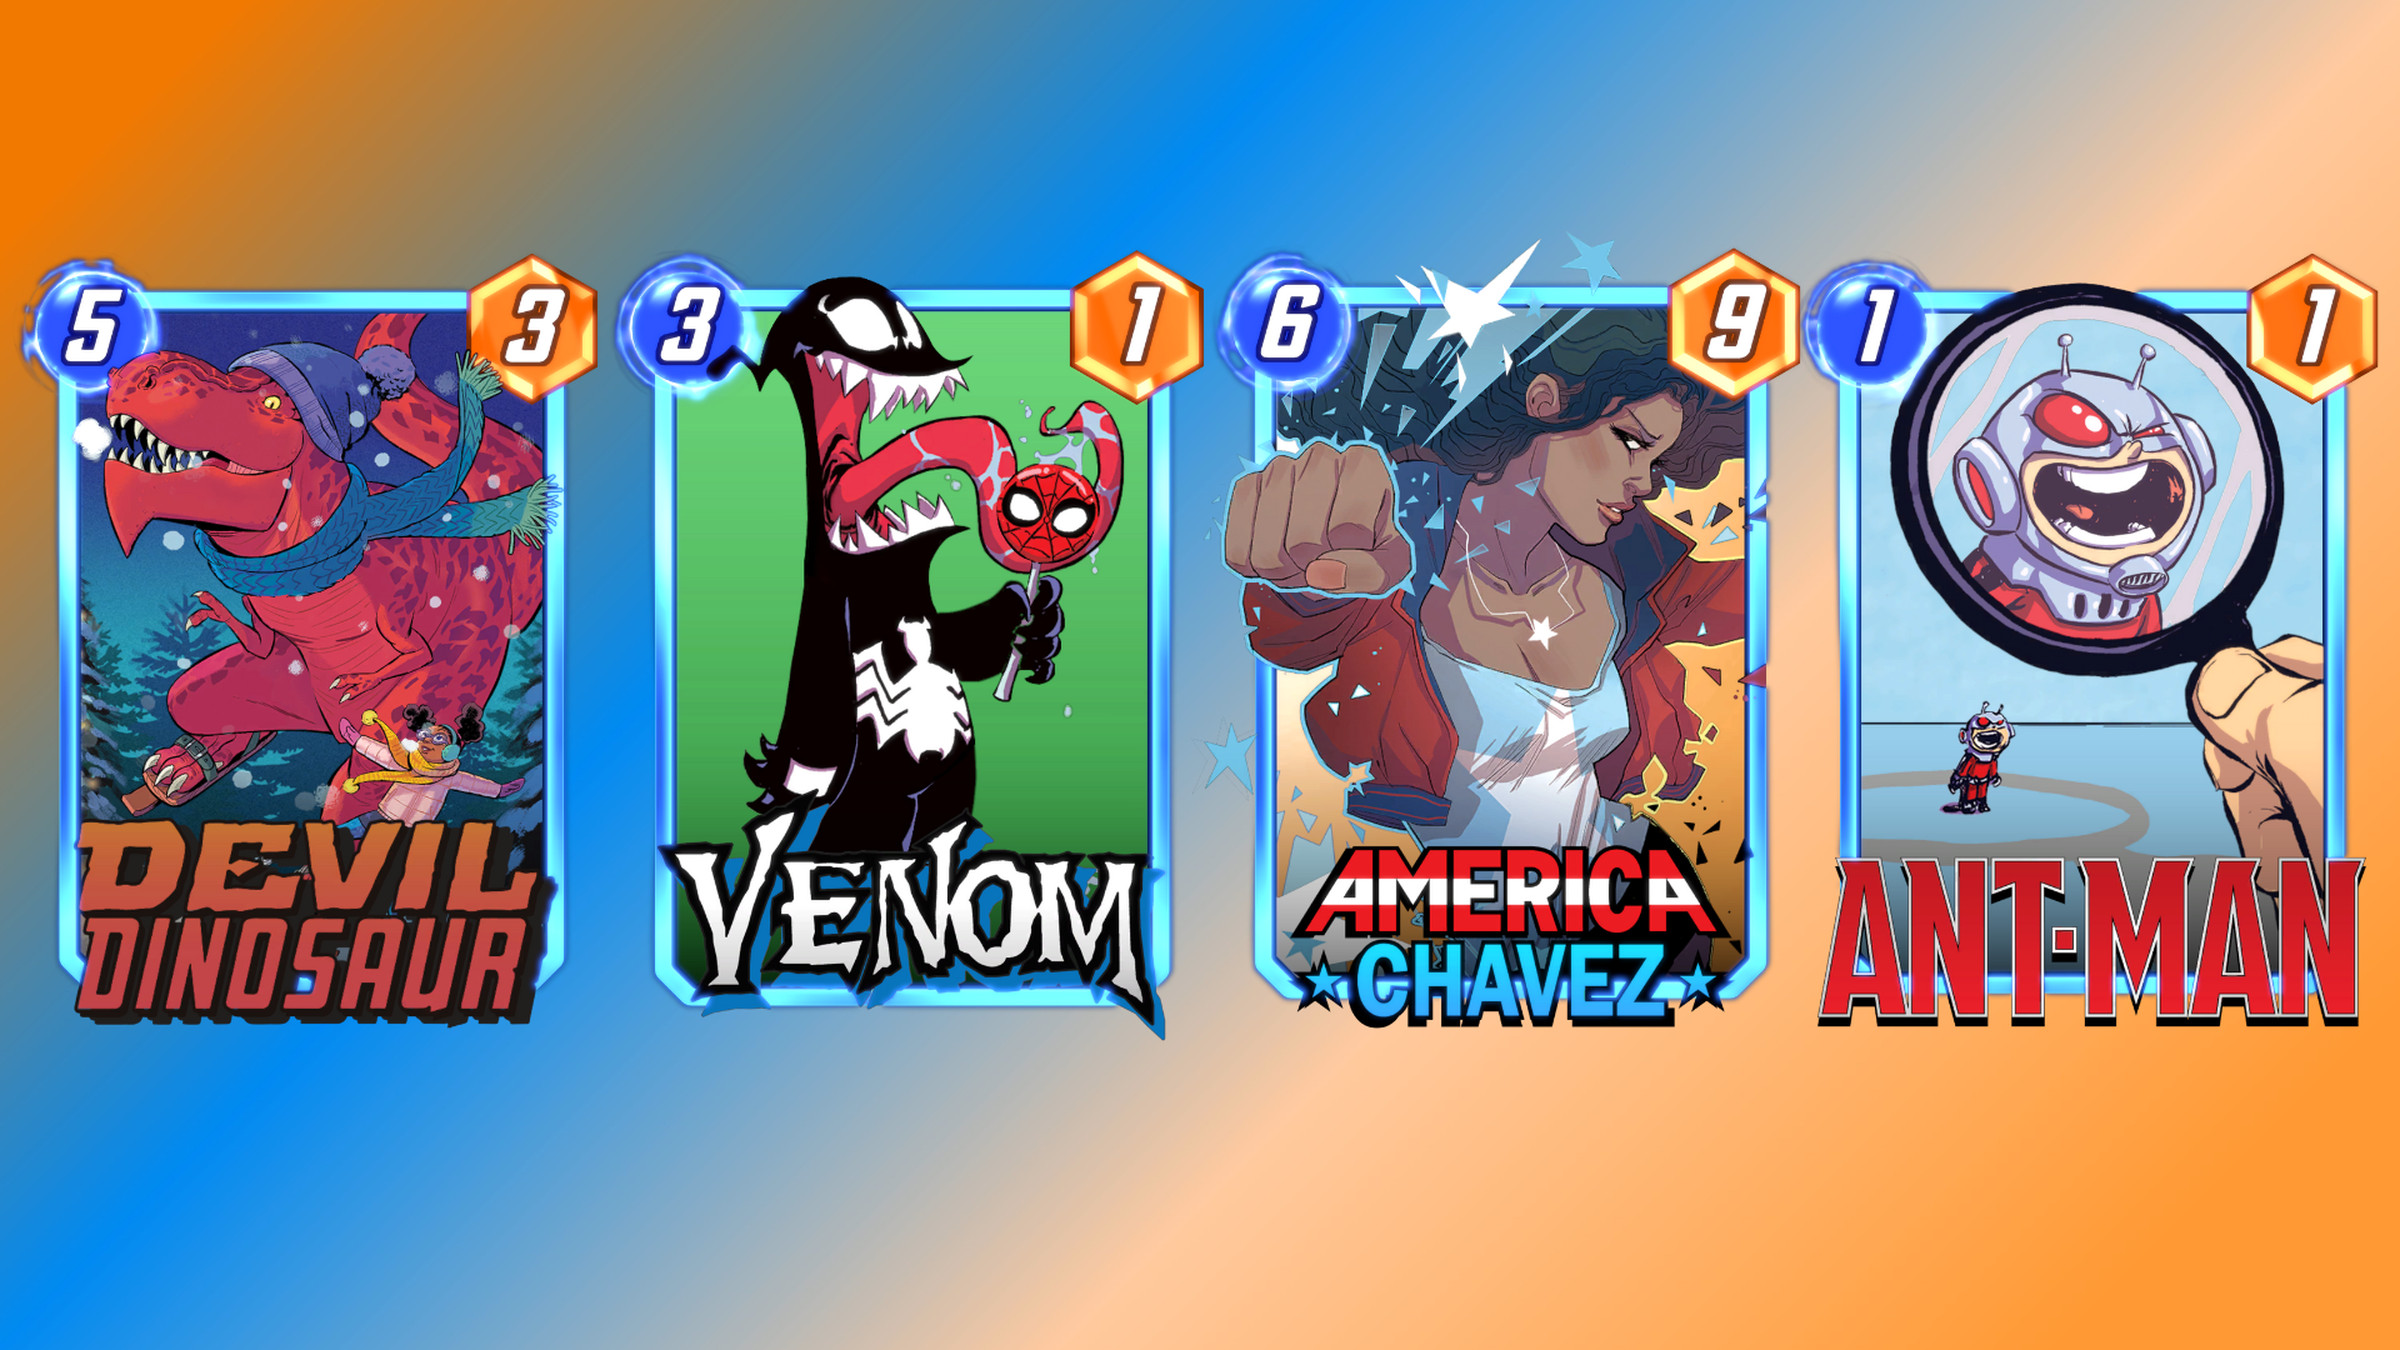 Graphic of cards from Marvel Snap featuring the Devil Dinosaur, Venom, America Chavez, and Ant Man variant cards